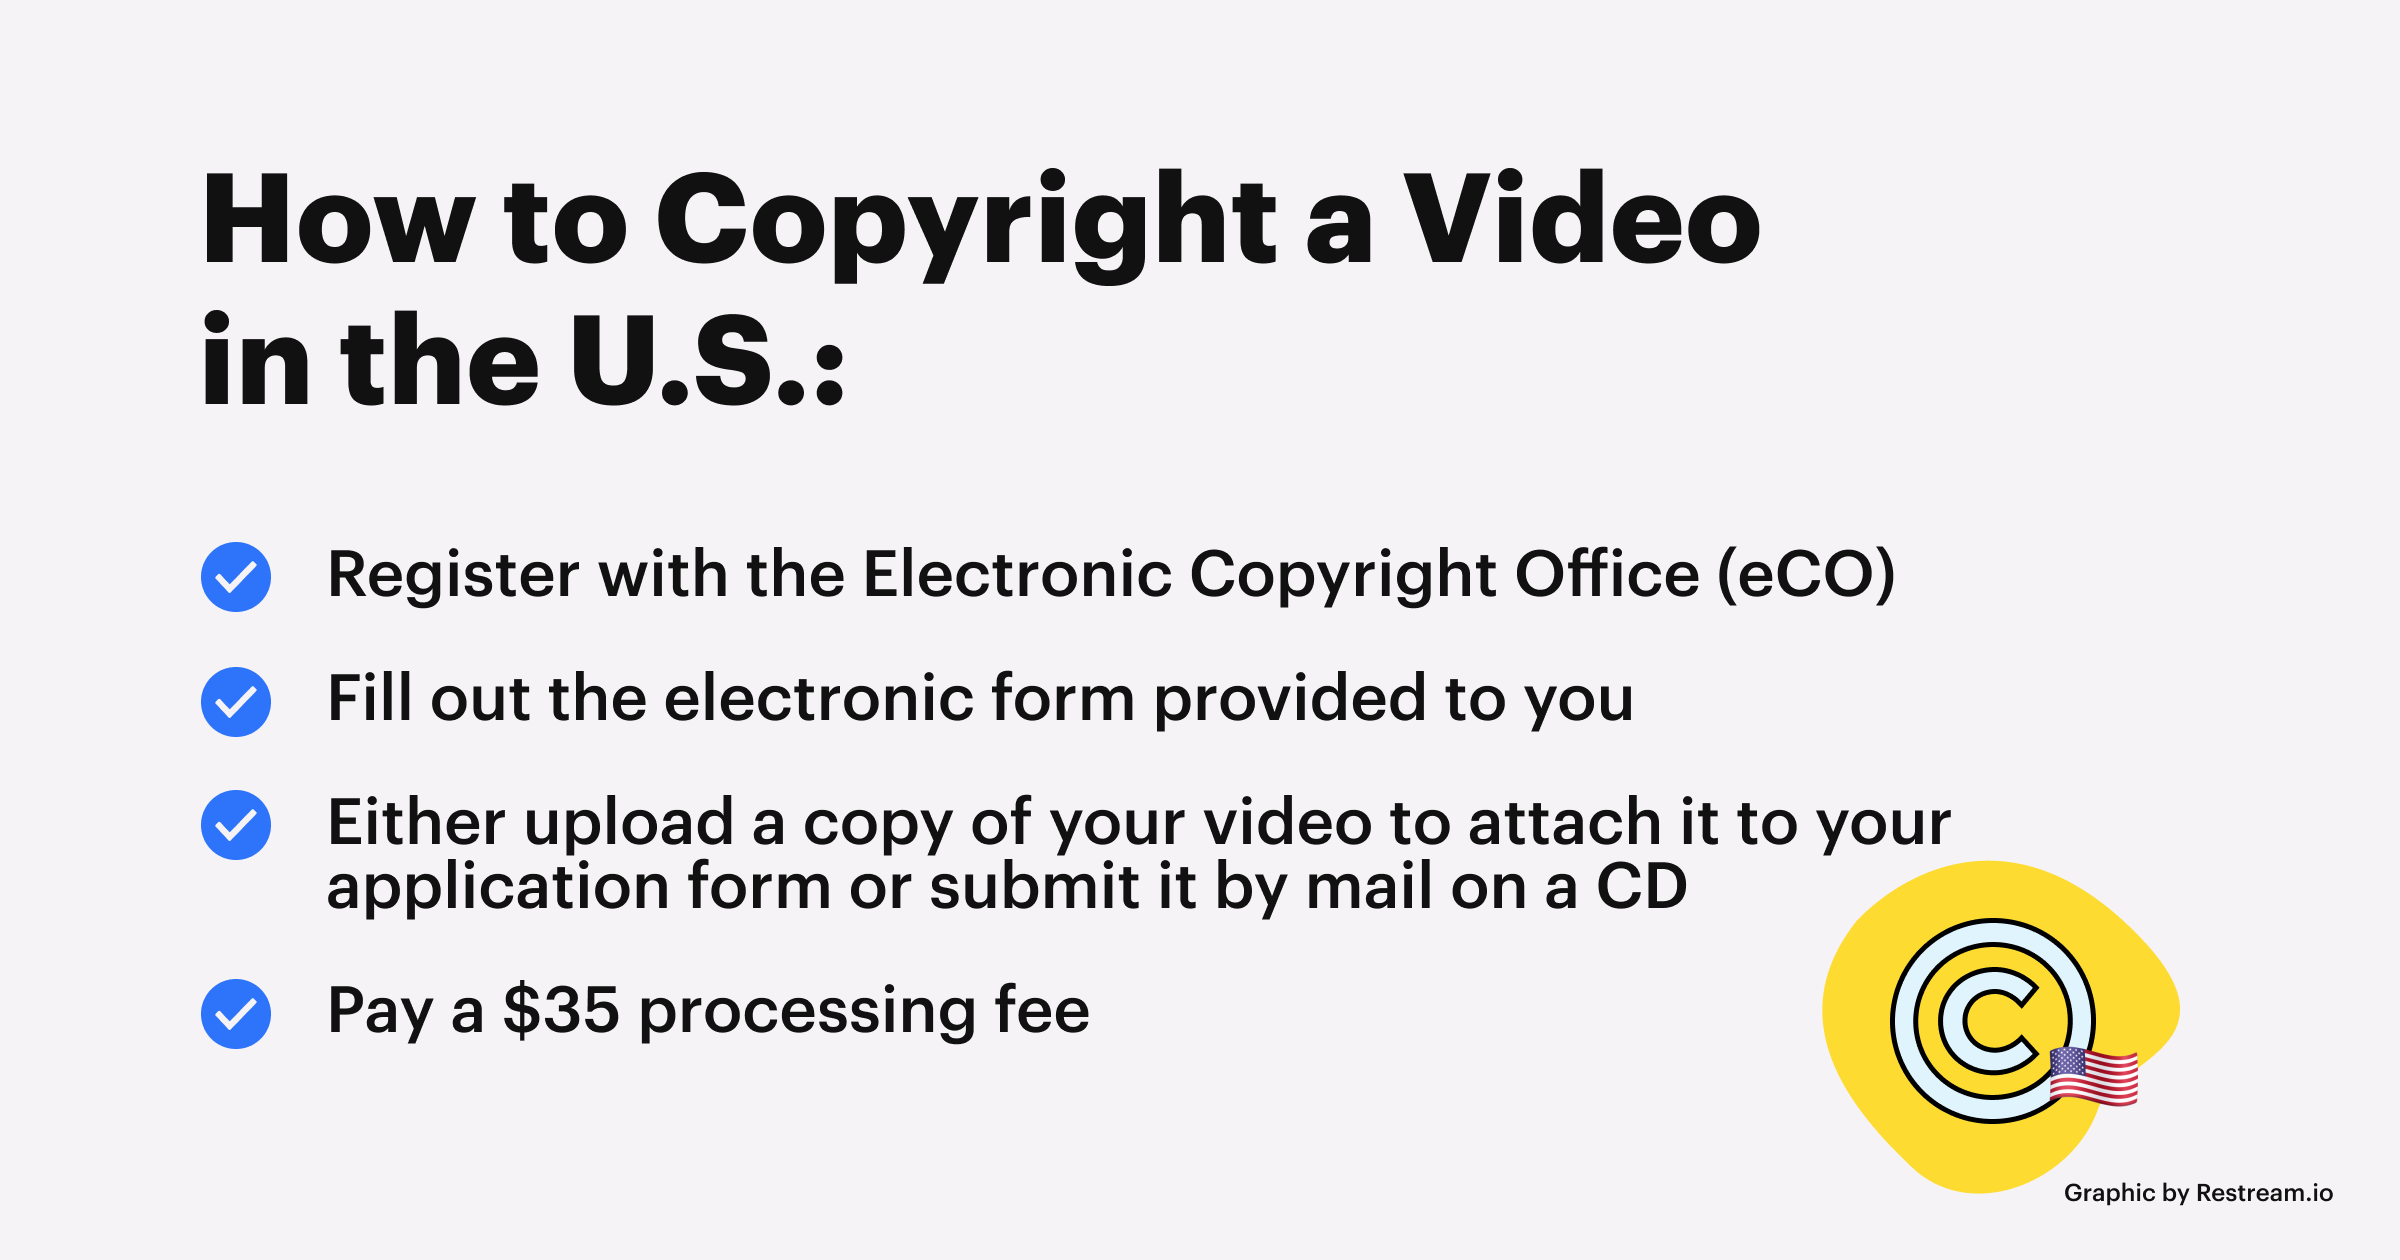 How to copyright a video in the U.S.